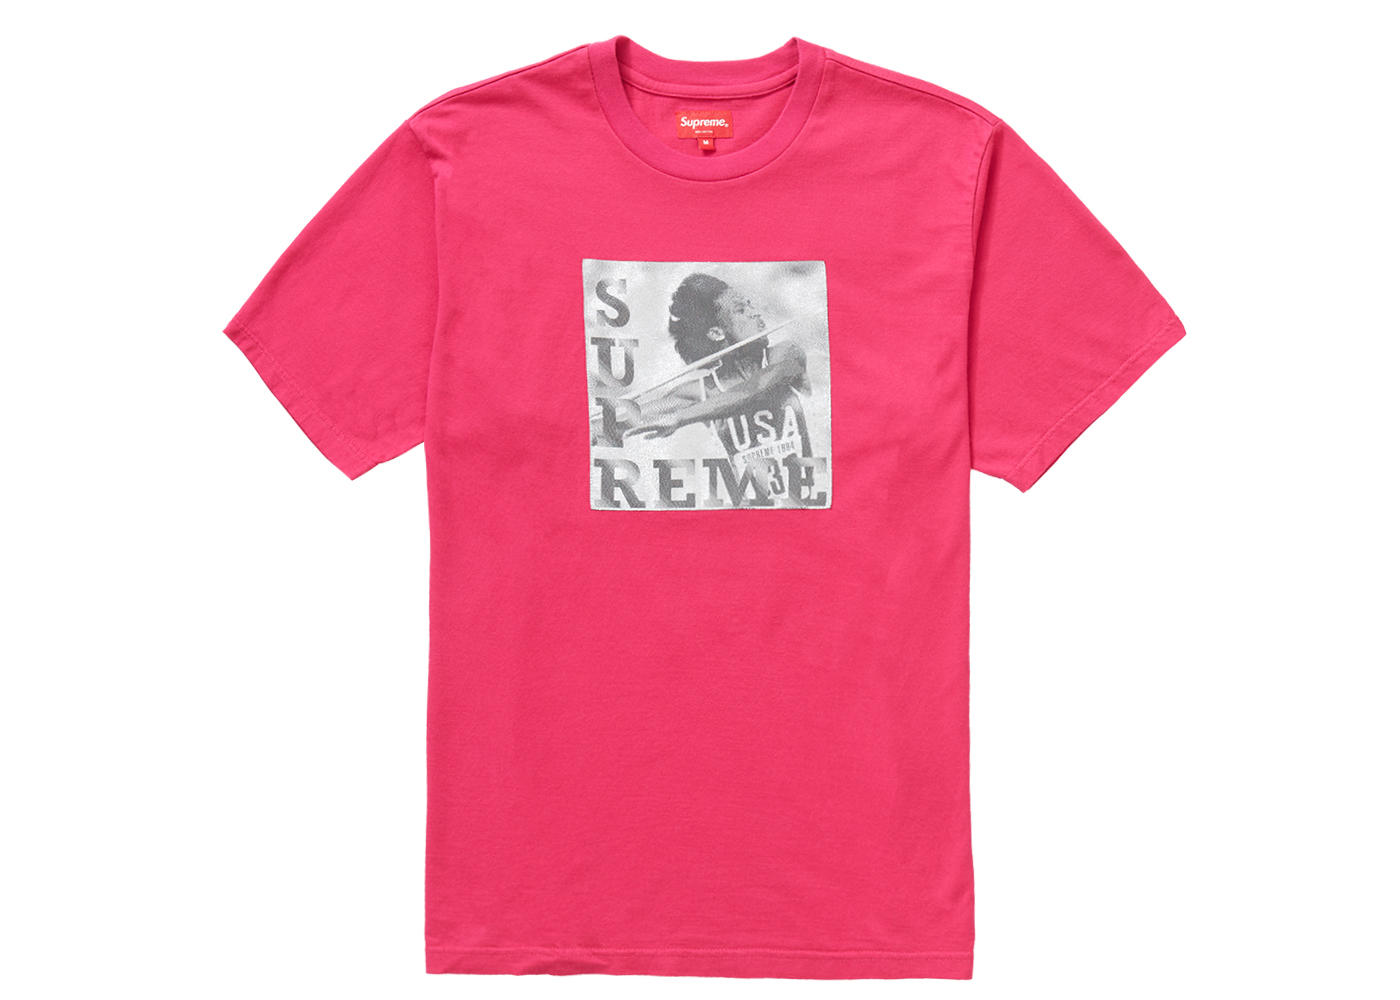 【NEW好評】Supreme Javelin Label S/S Top L size Tシャツ/カットソー(半袖/袖なし)